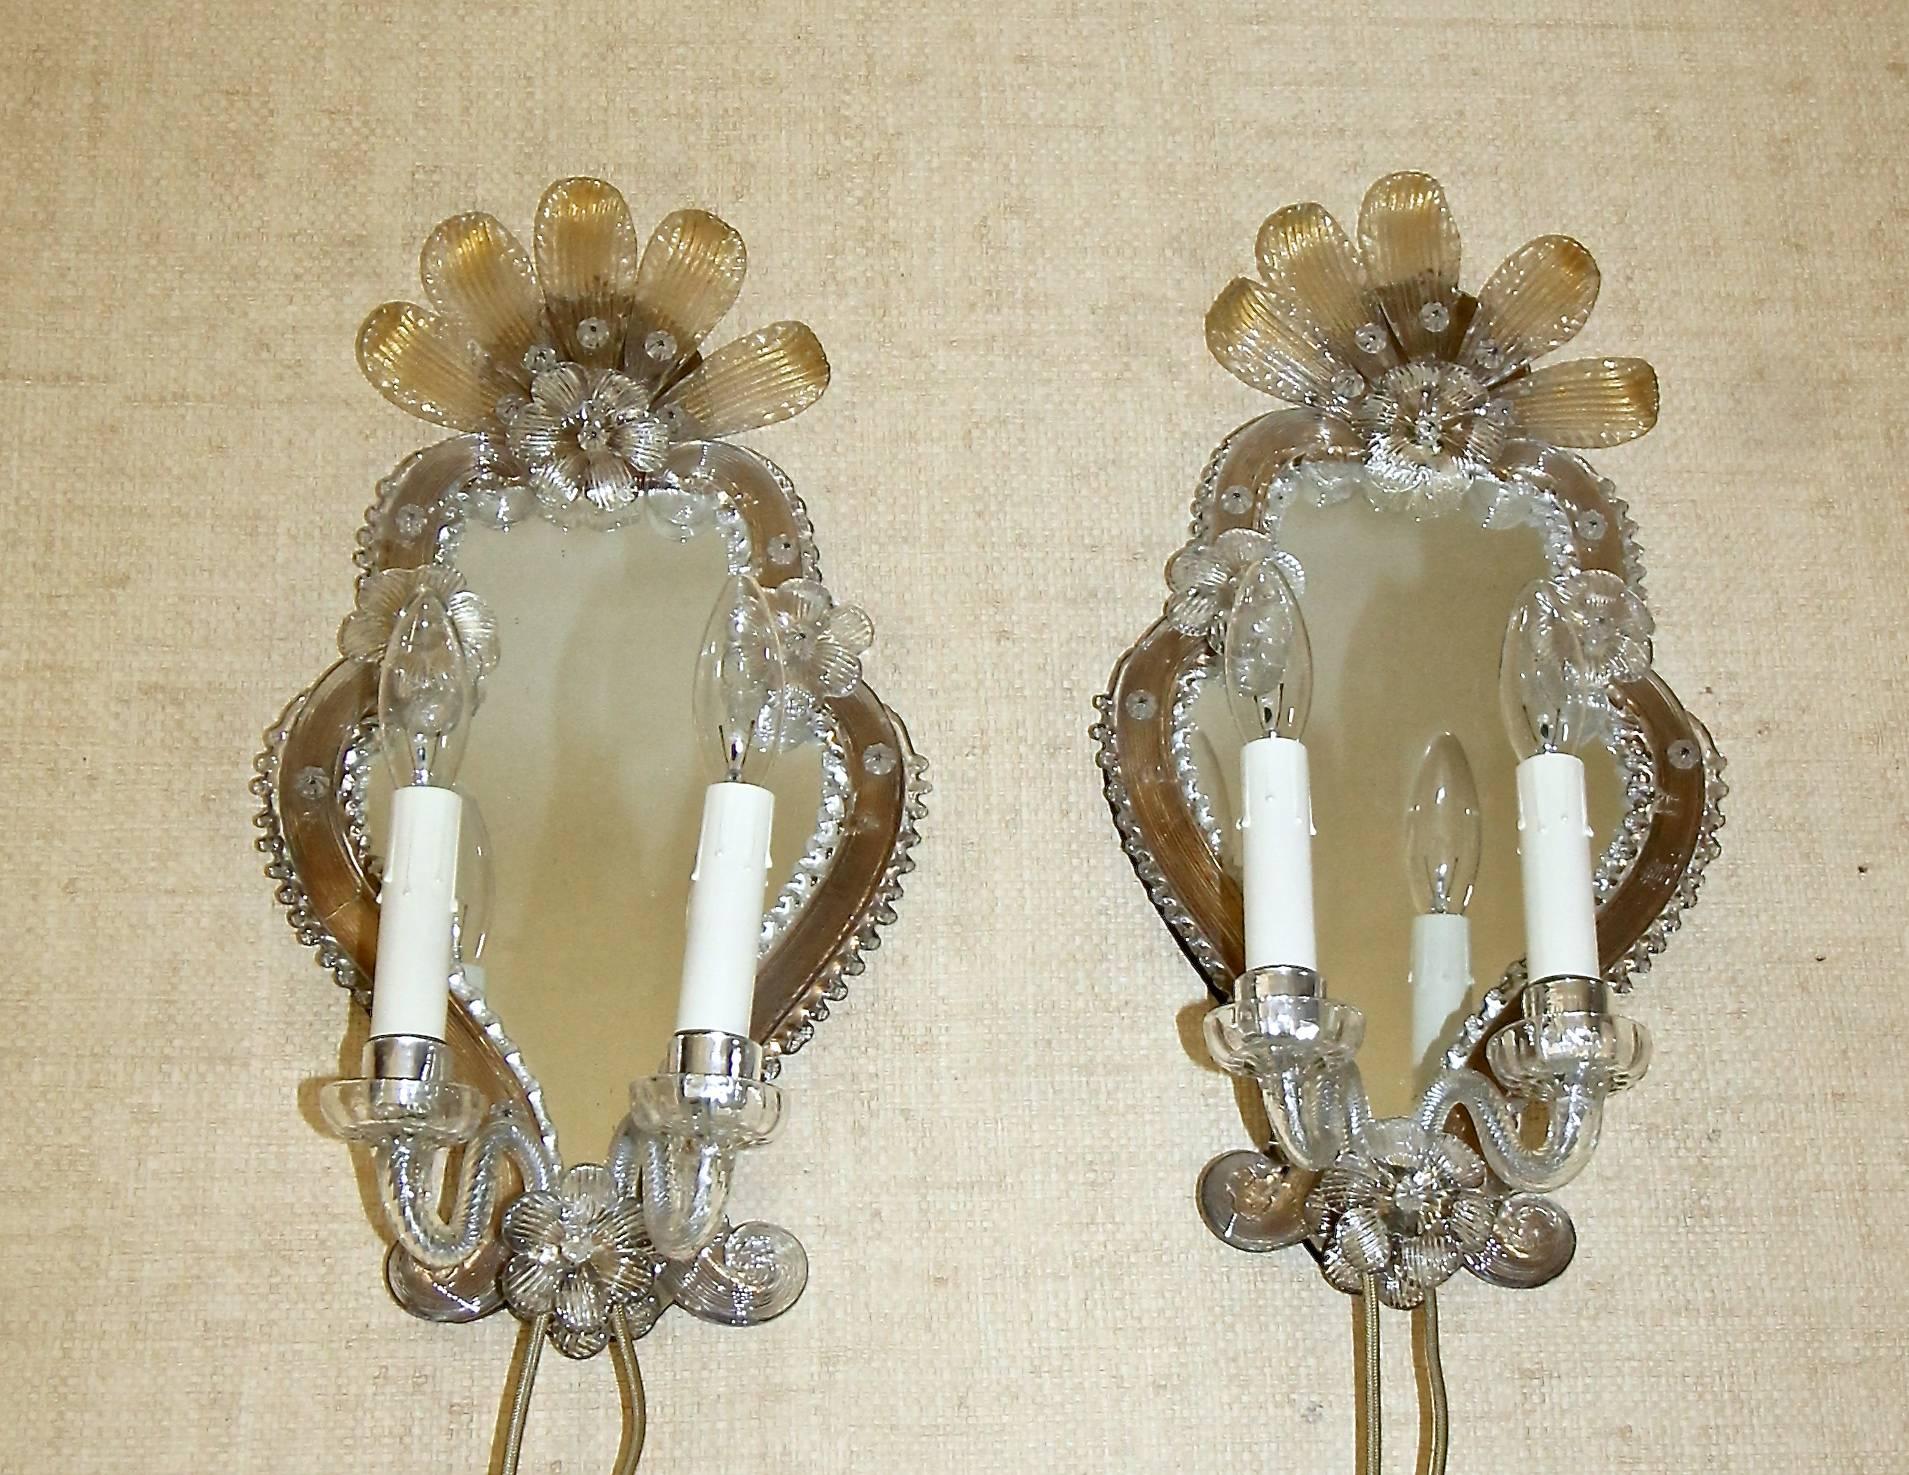 Pair of Venetian two-light mirrored sconces with clear and gold flowers and applied clear glass scroll decoration. Each sconce uses 2-40 watt max candelabra base bulbs. Newly wired.